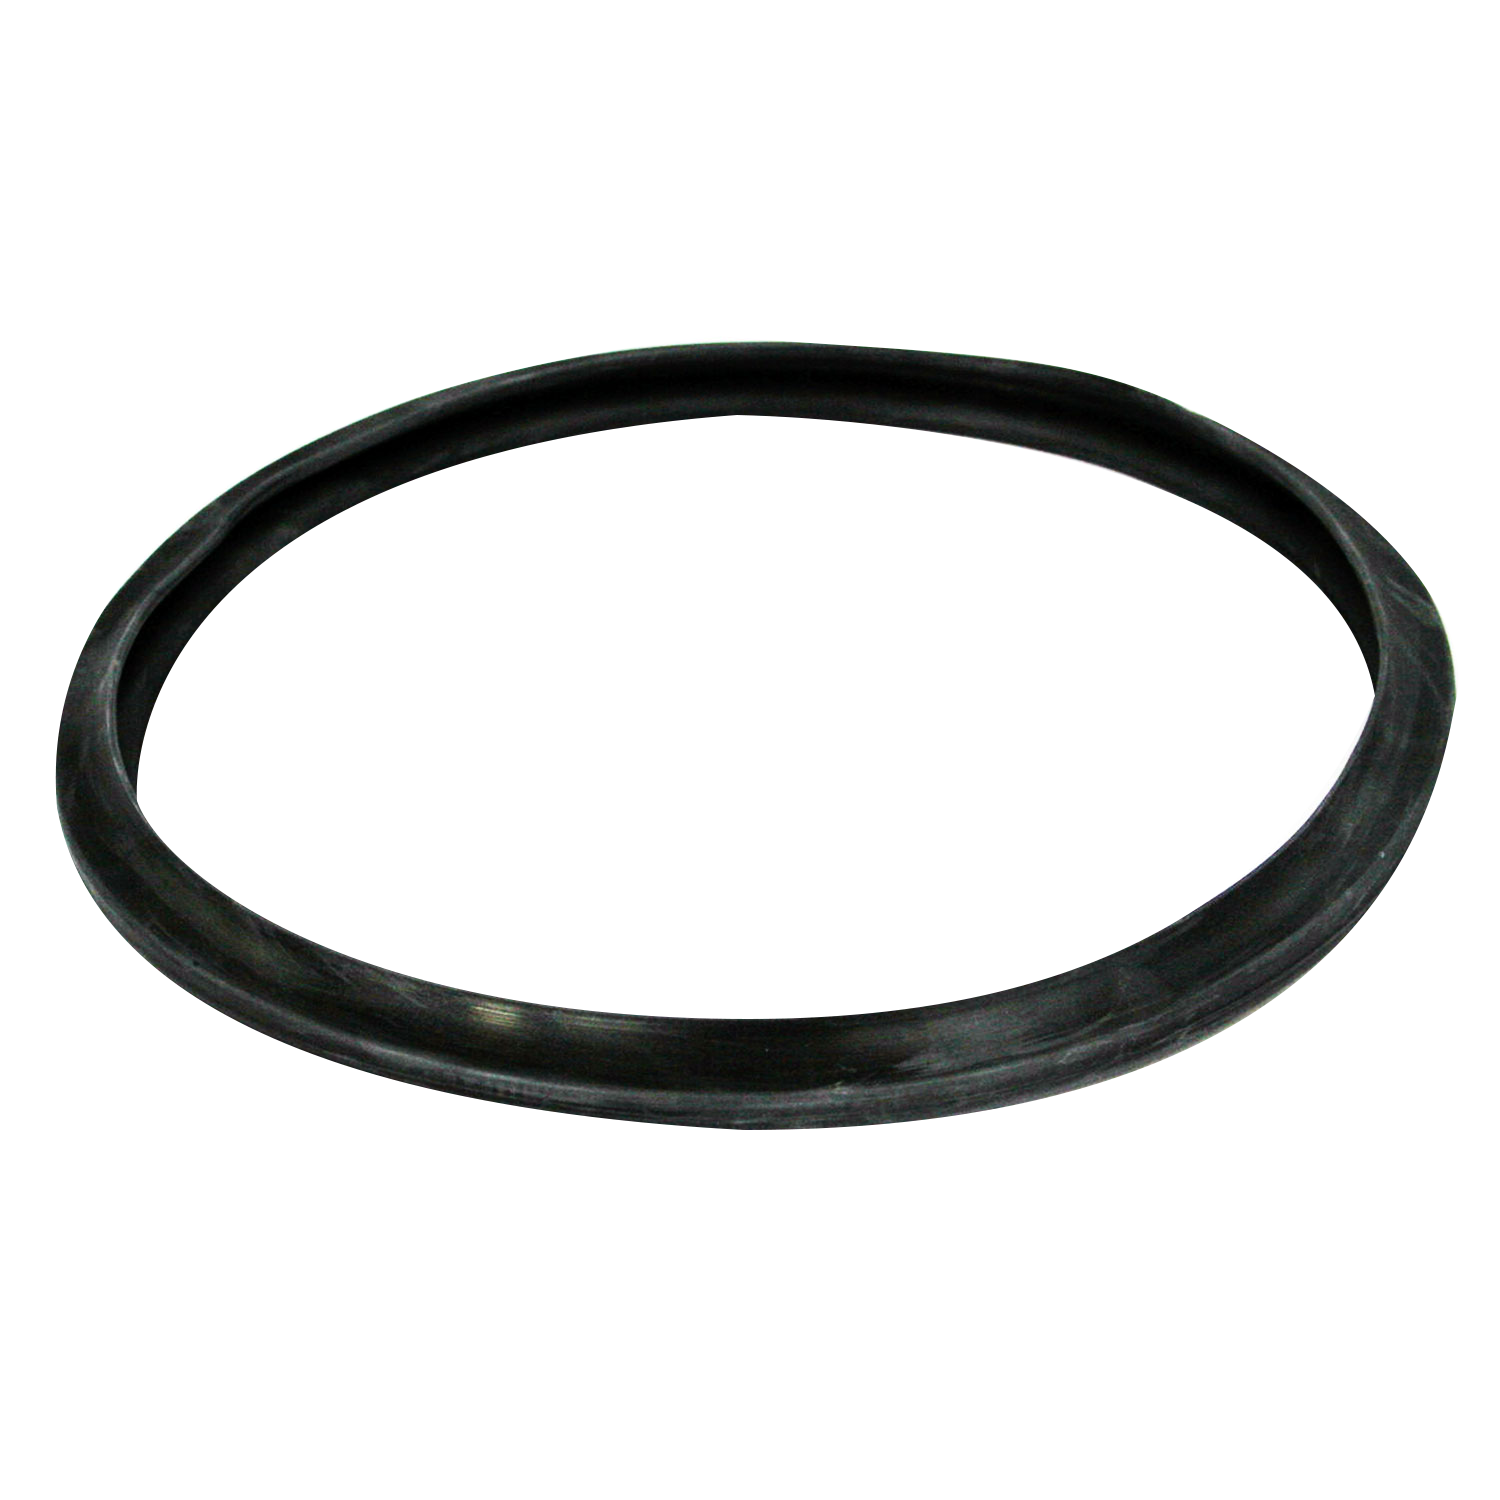 RACO / Namco Gasket For Stainless Steel 6L Pressure Cooker (24cm Diameter)